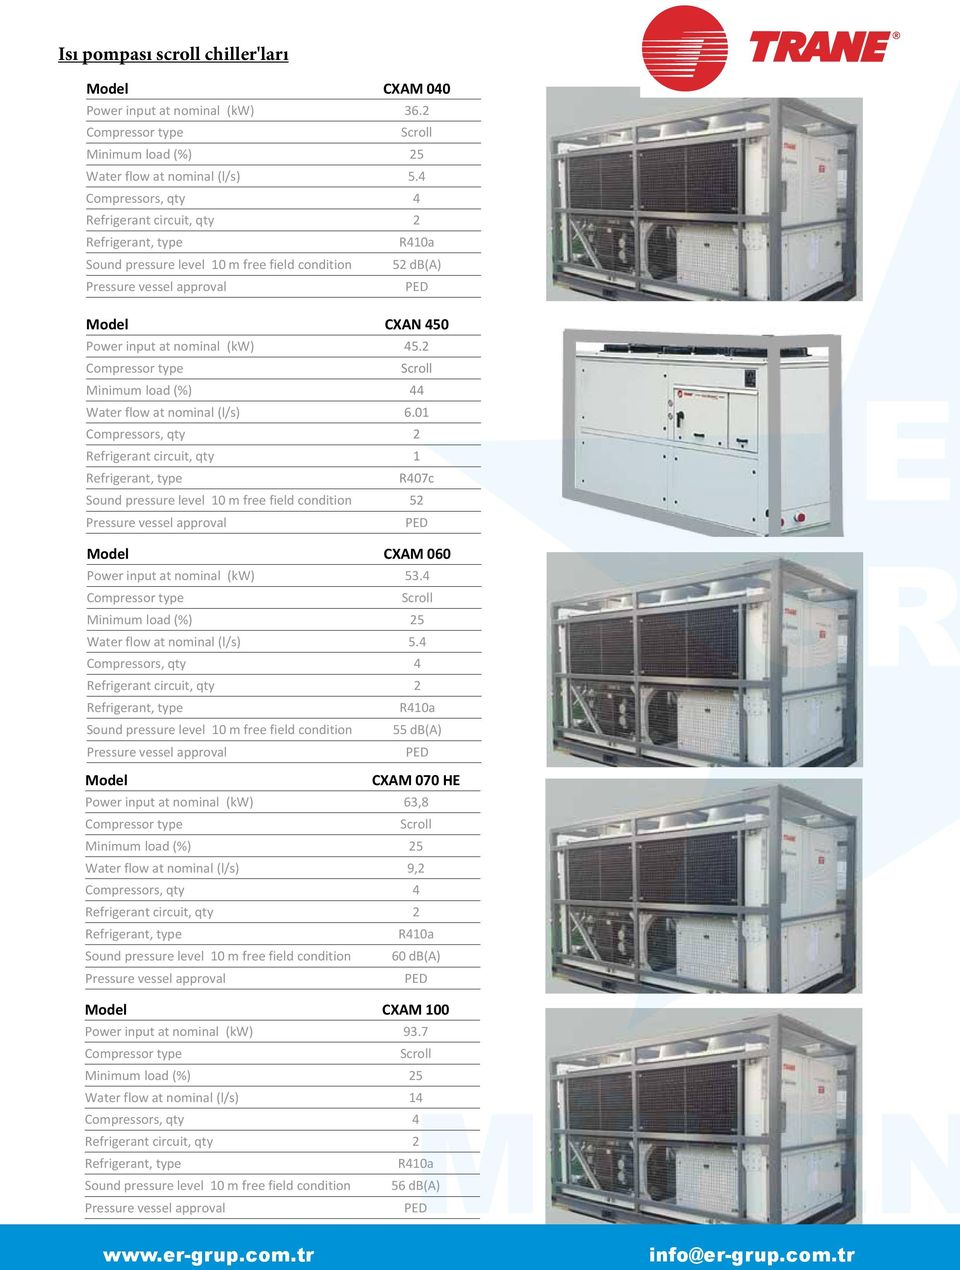 6 kw (1) 7 C chilled water and 35 C air Sound pressure level 10 m free field condition 52 db(a) Pressure vessel approval PED Model CXAN 450 Operating range Power input at nominal (kw) 45.